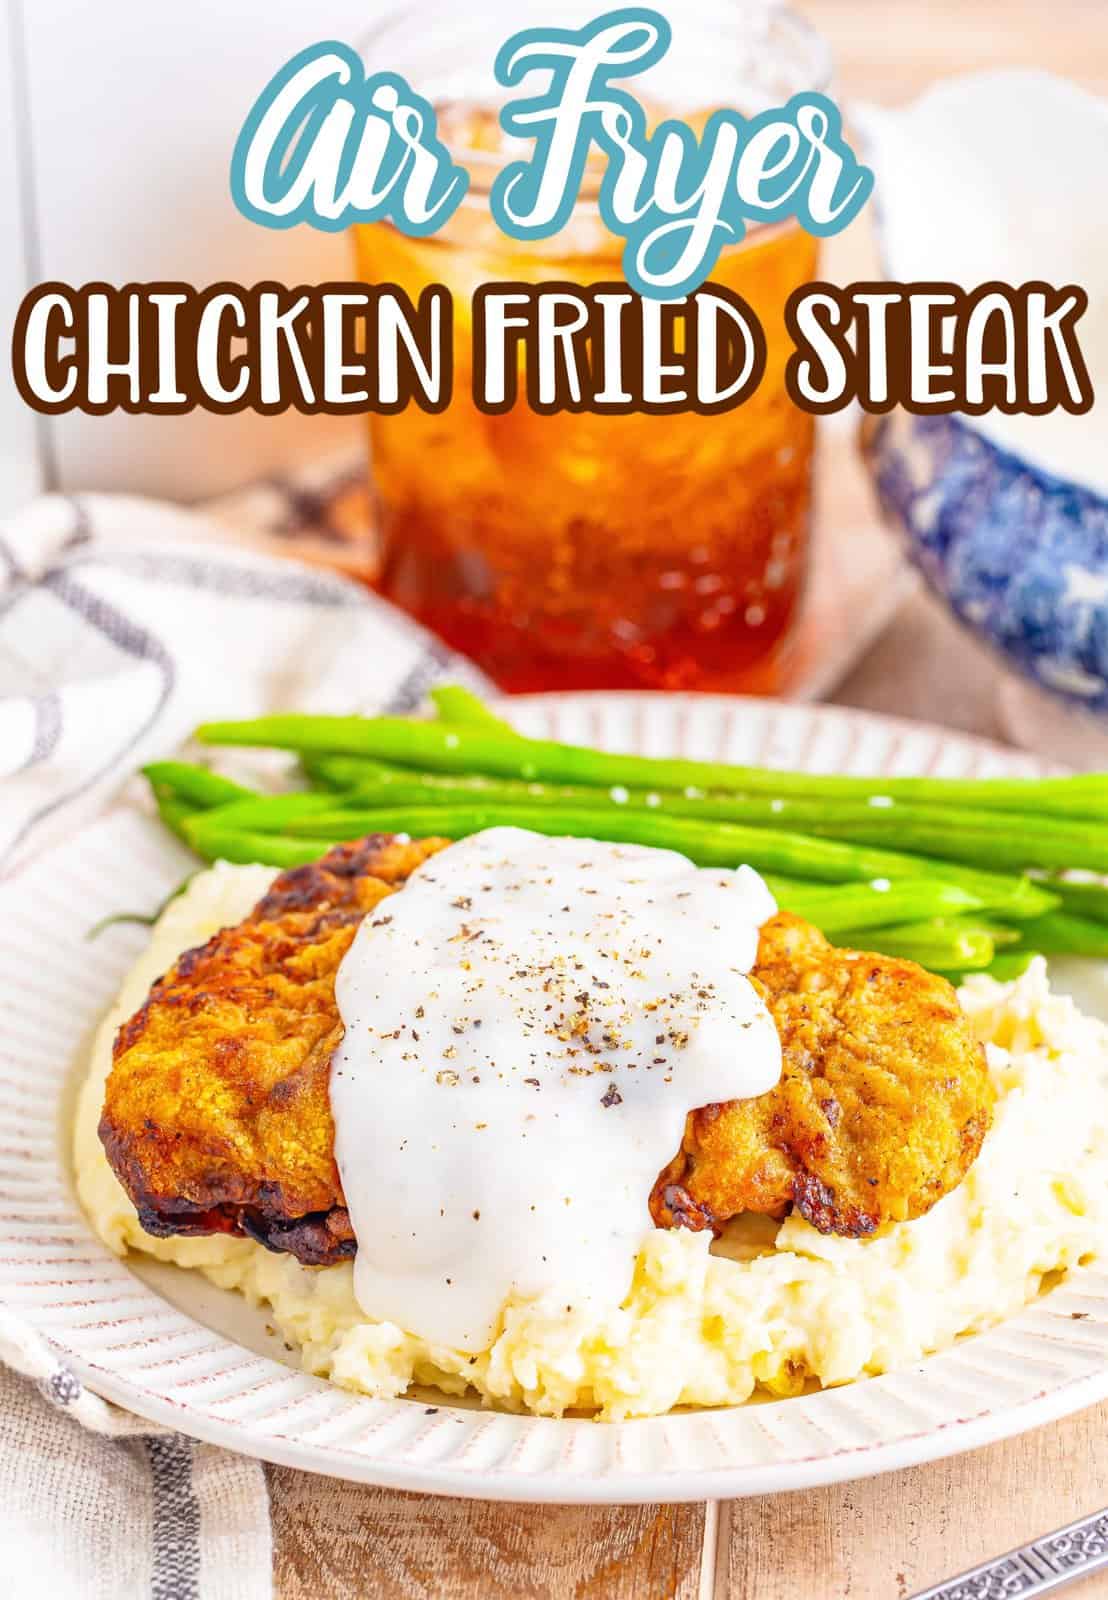 Chicken fried steak made in the Air Fryer on a plate with sides.